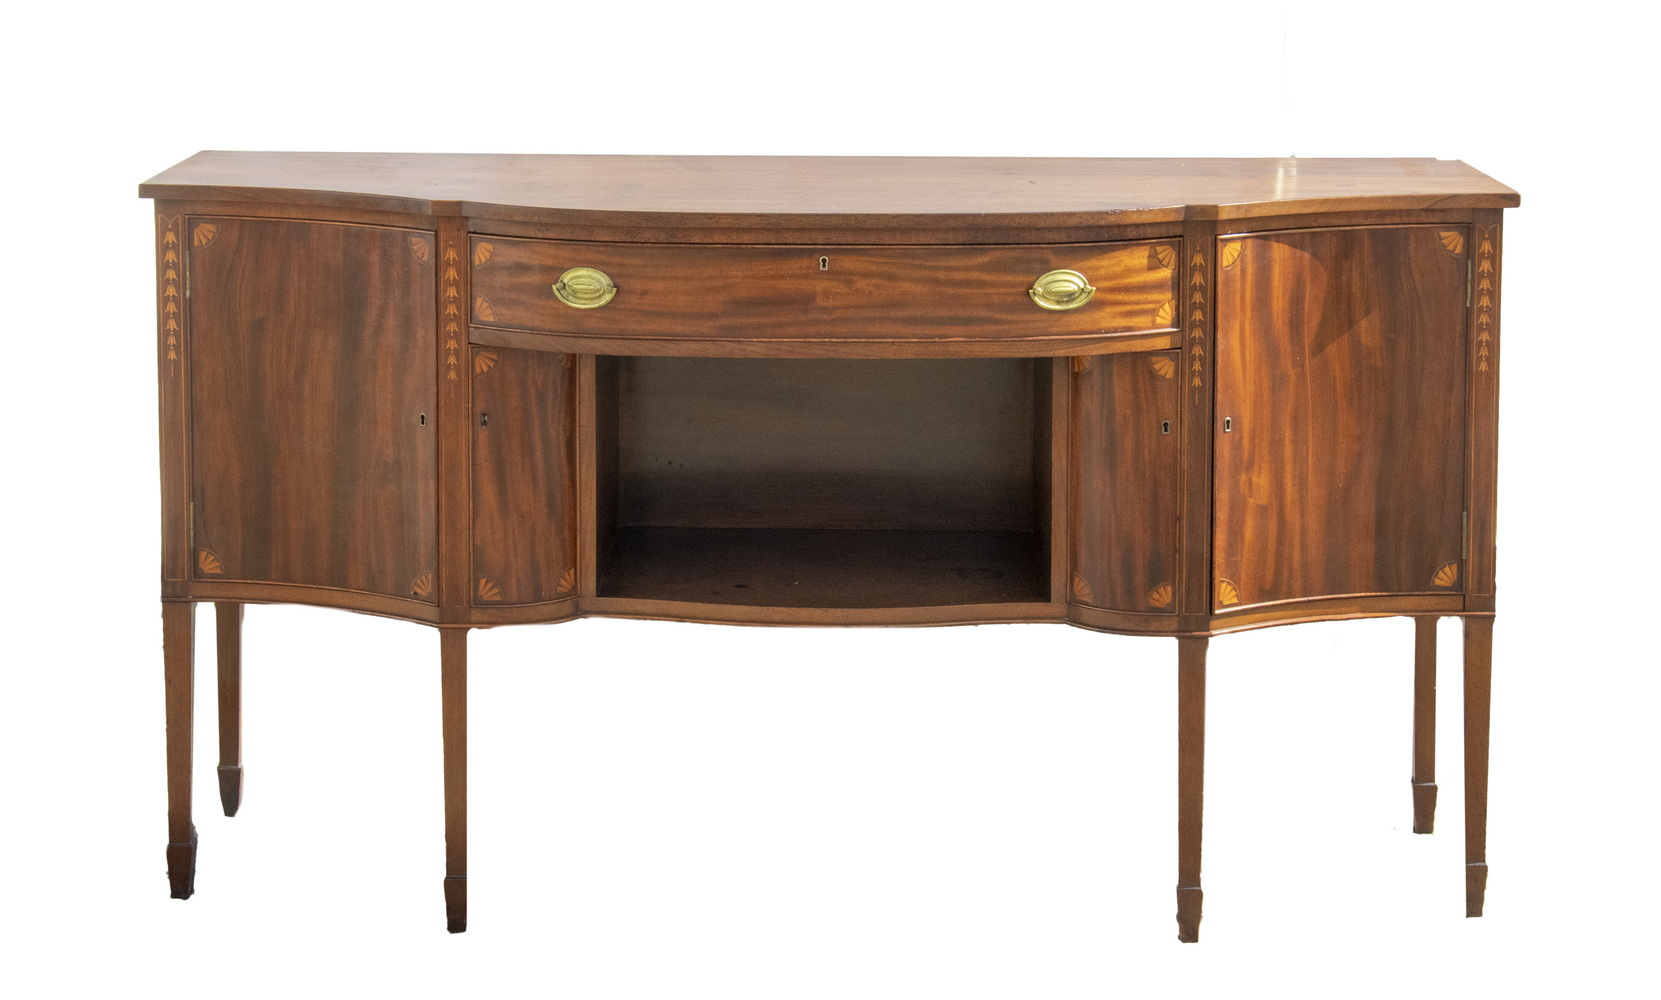 MAHOGANY SIDEBOARD WITH MARQUETRY